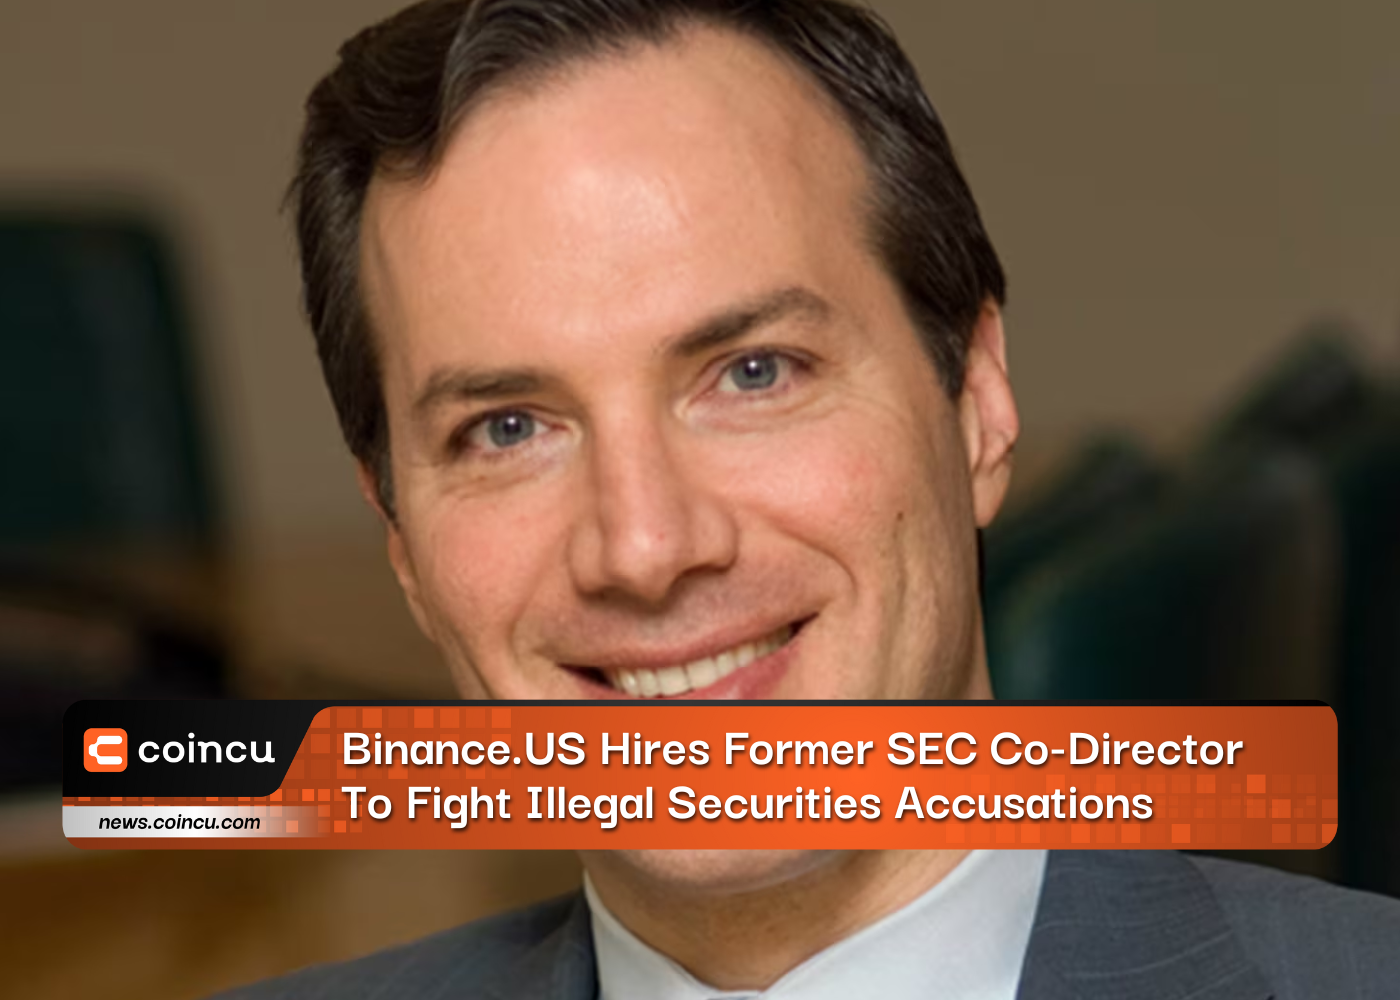 Binance.US Hires Former SEC Co-Director To Fight Illegal Securities Accusations